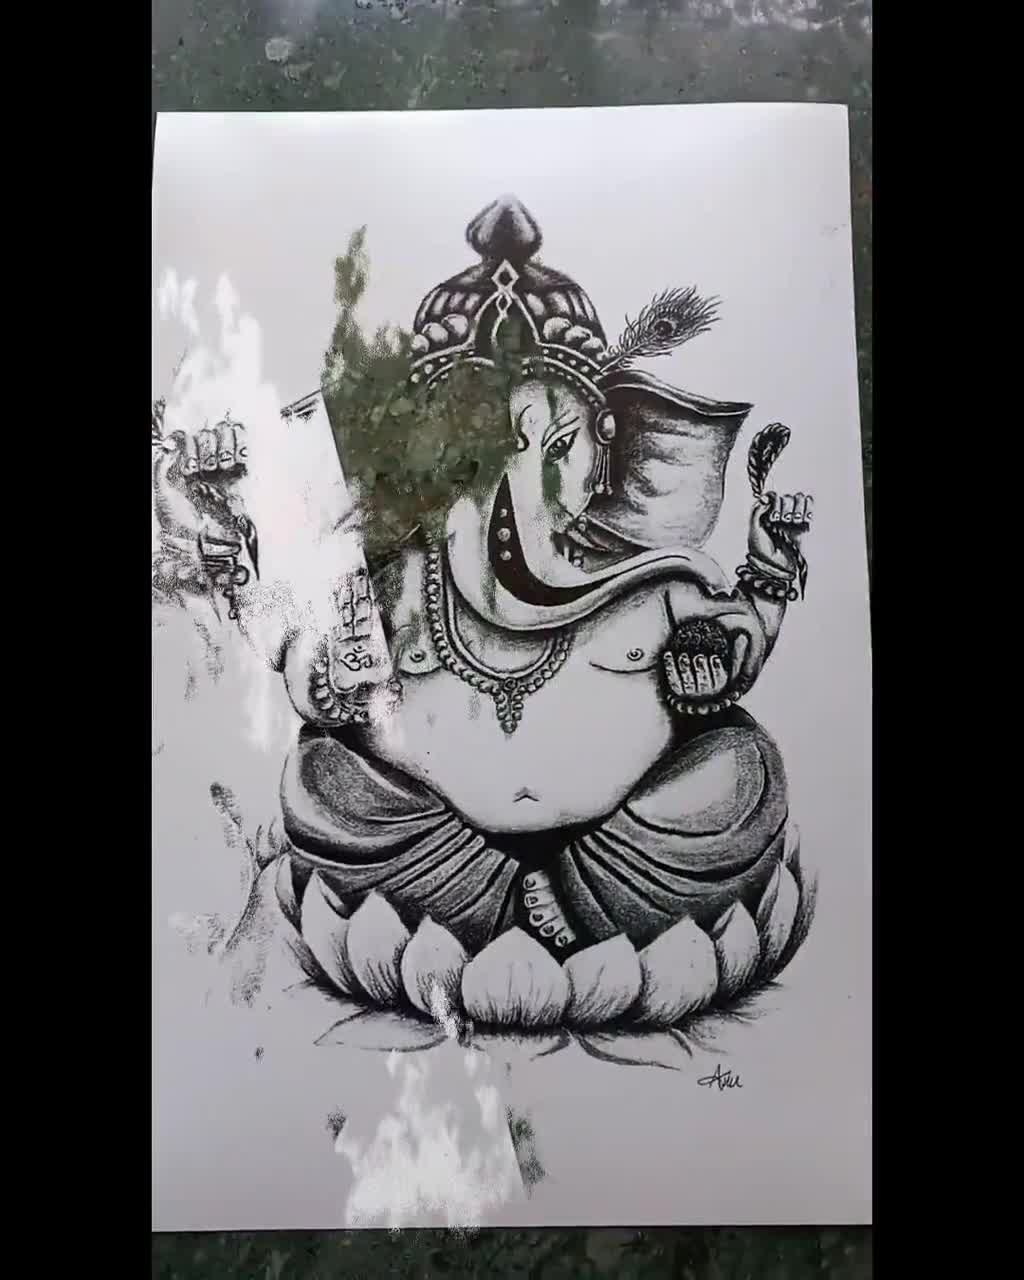 Life lessons from Lord Ganesha - Times of India